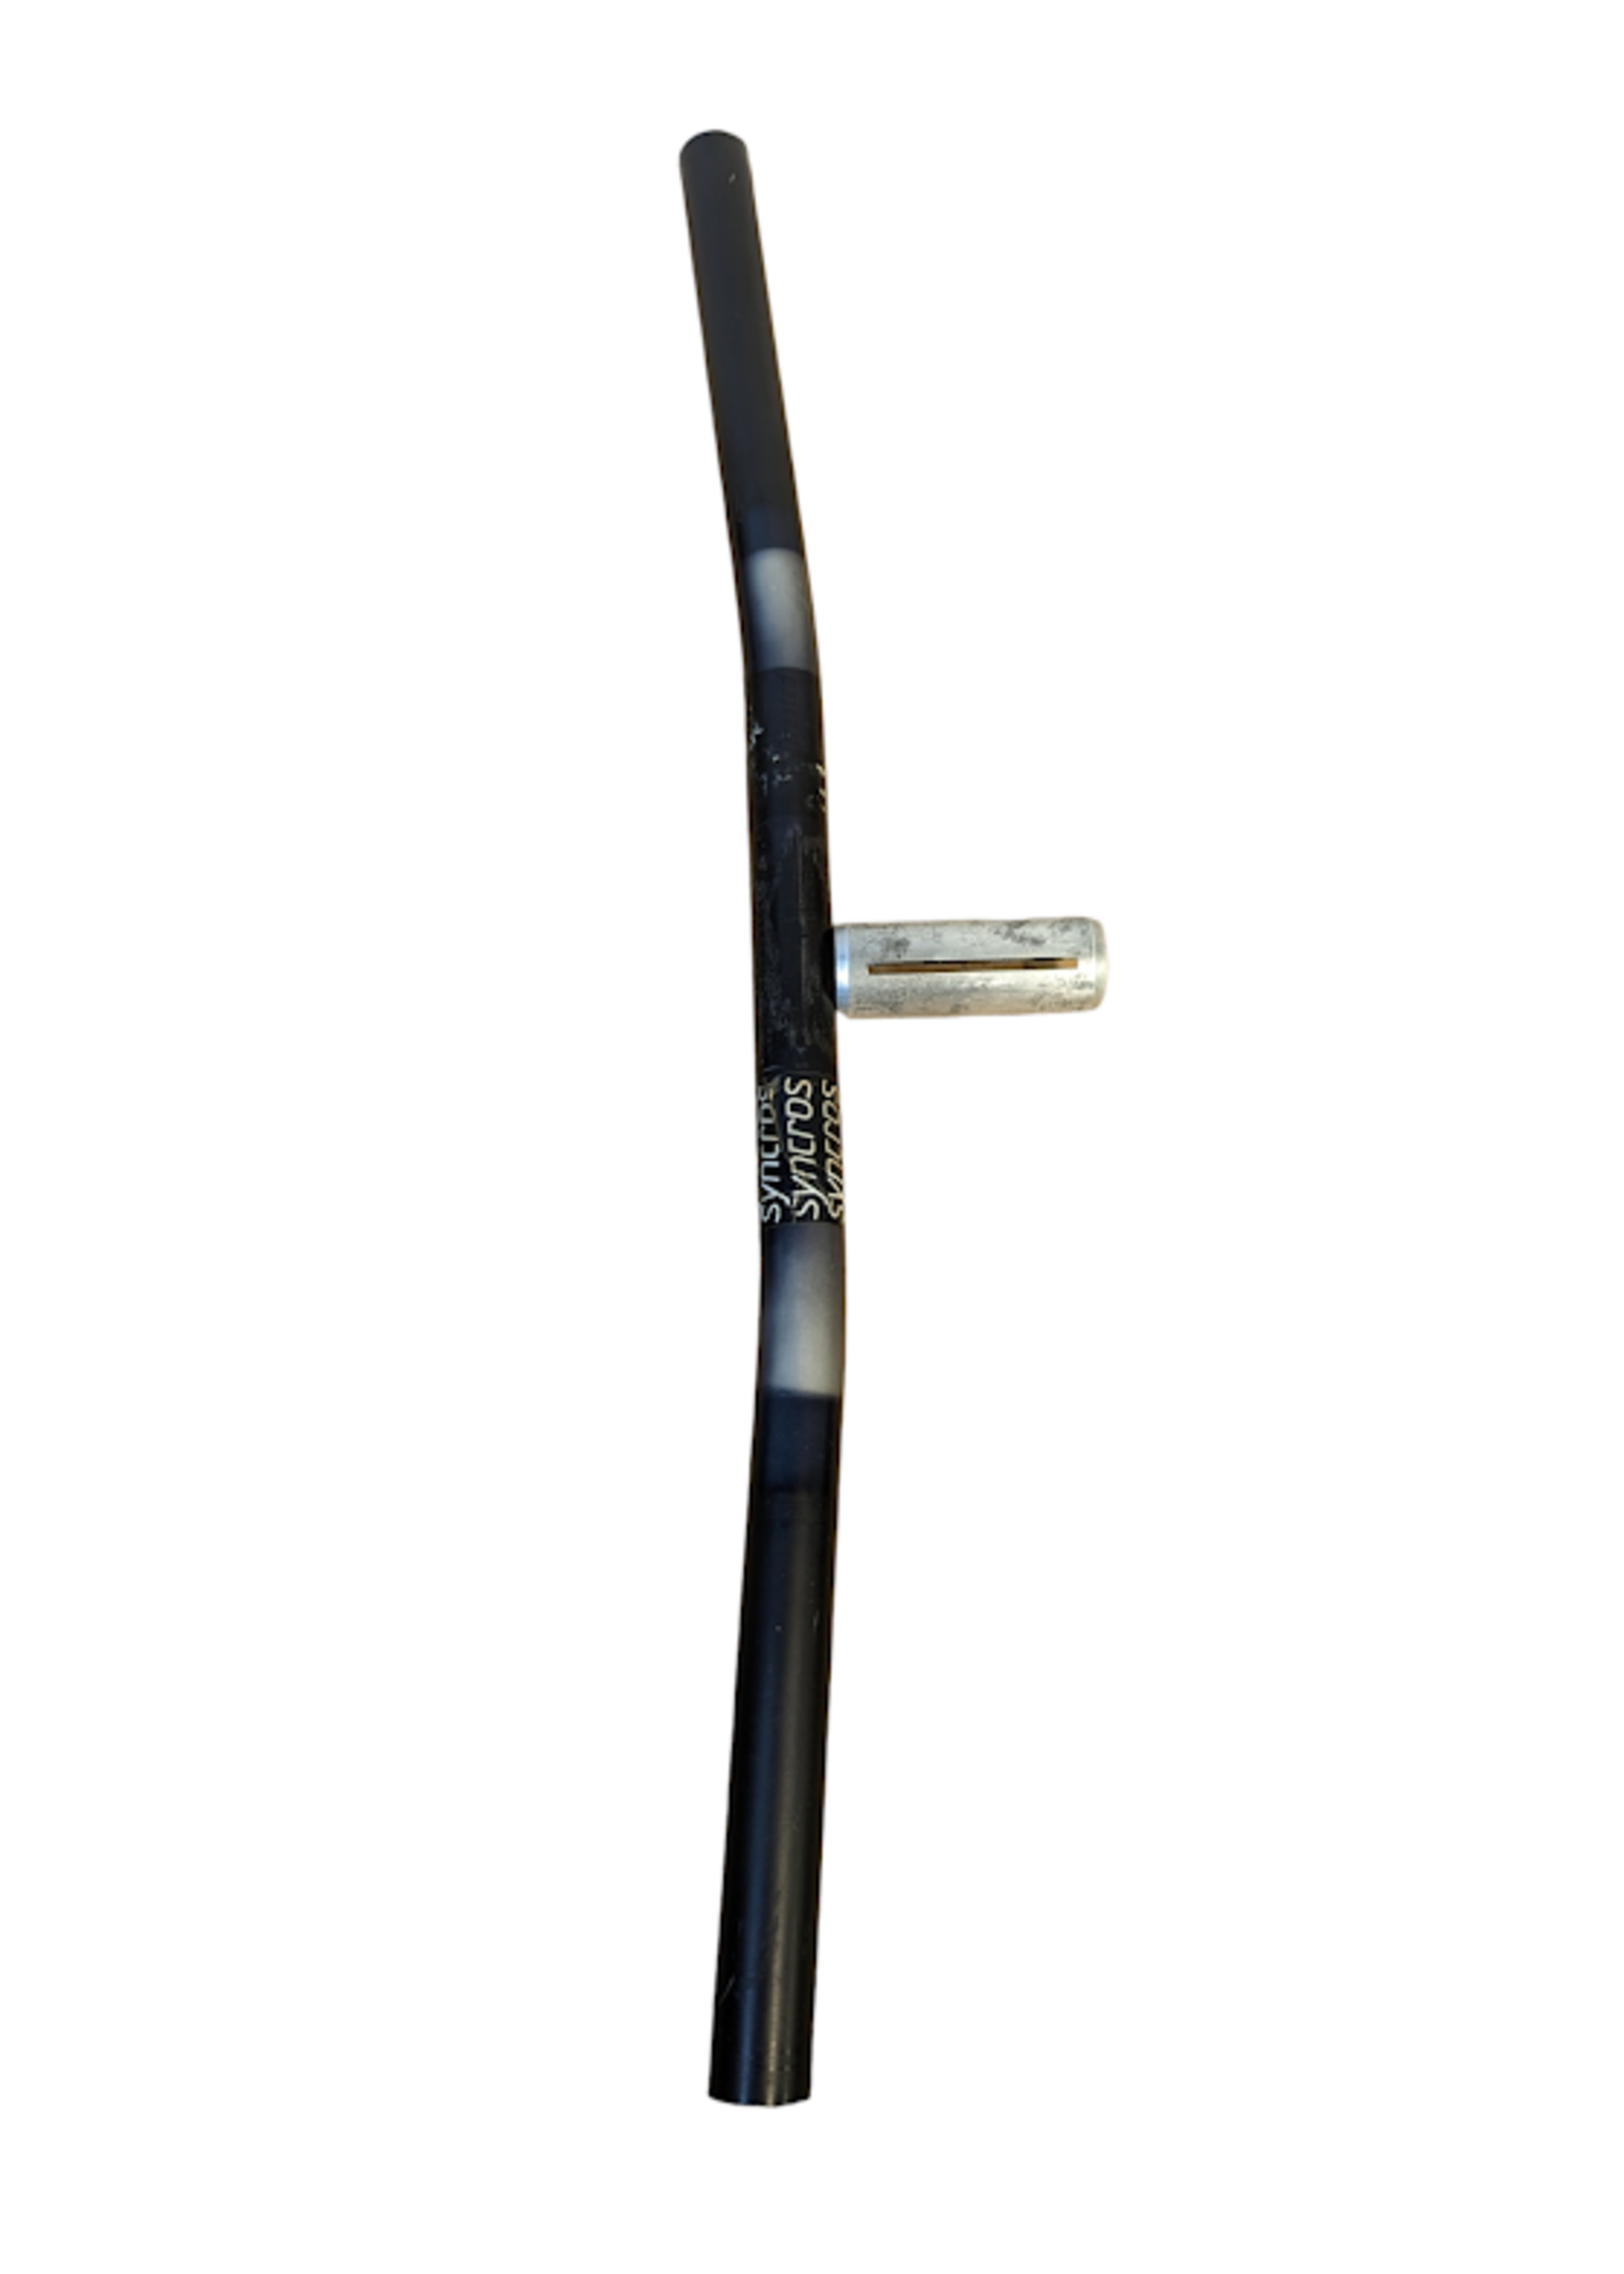 Syncros Handlebar, 22.2 with 25.4mm shim. 21" wide